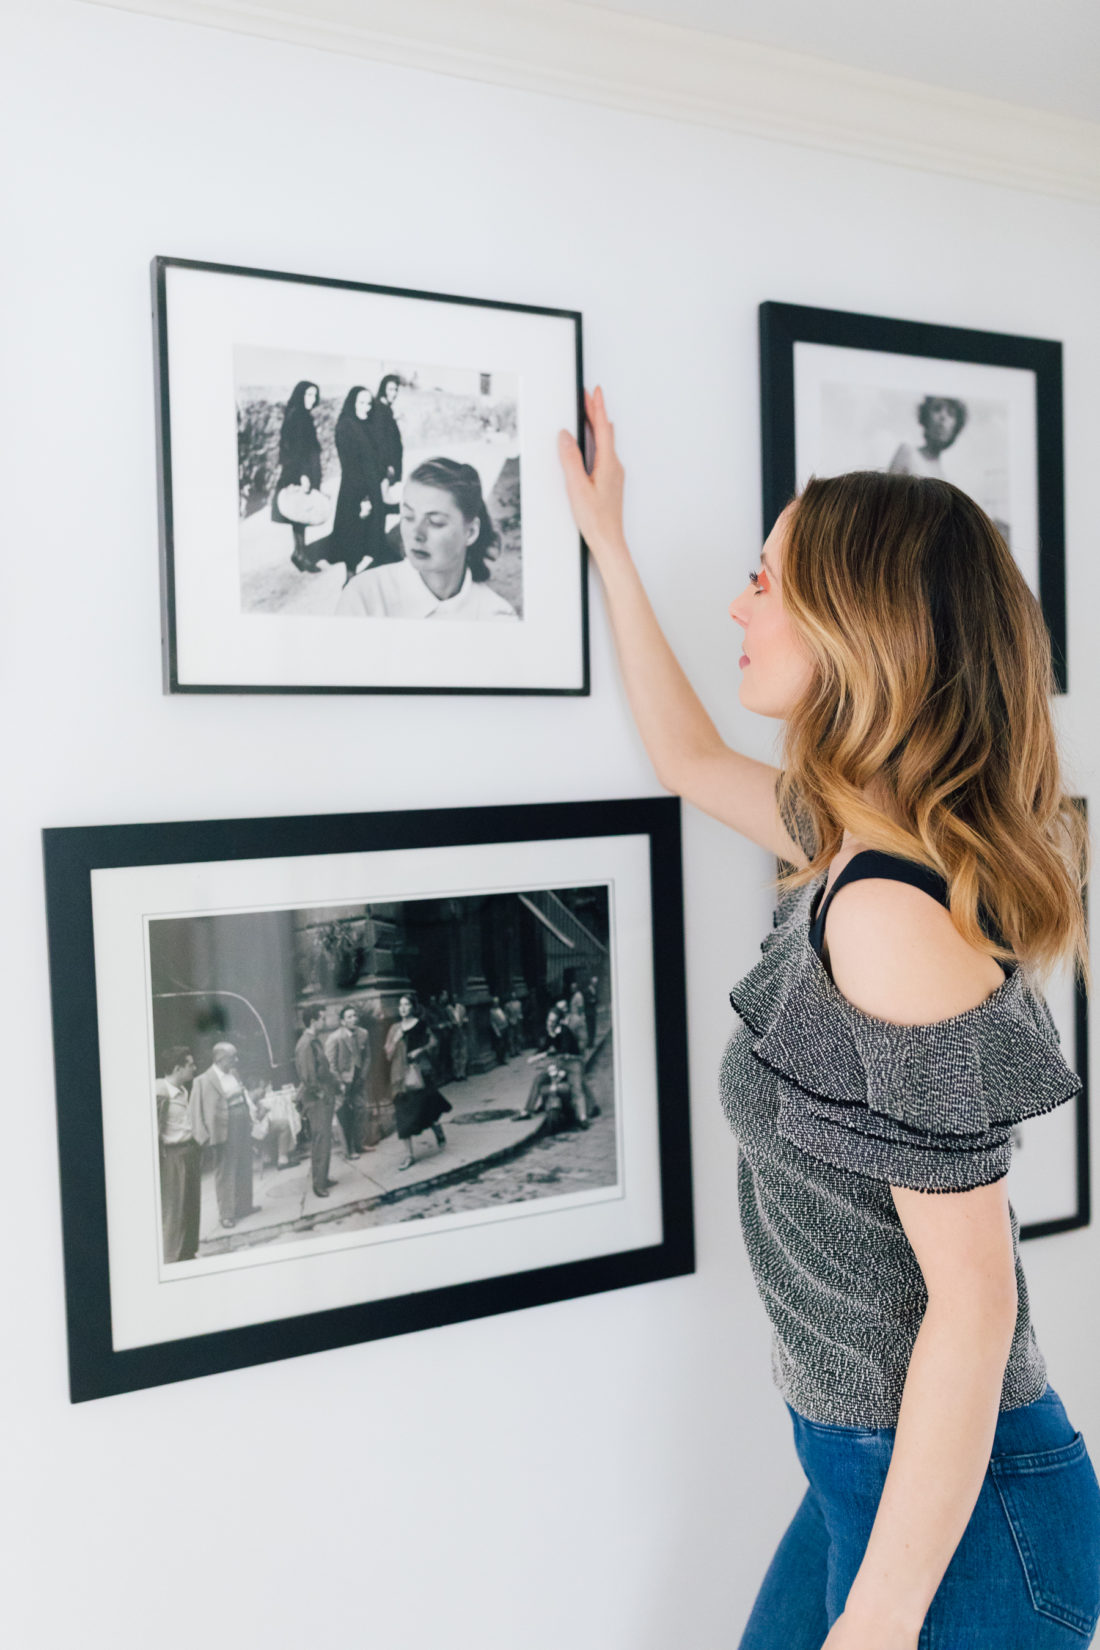 Eva Amurri Martino stands in the hallways of her connecticut home and selects a black and white photograph from the wall as she decides what to pack and what to give away before her family's move